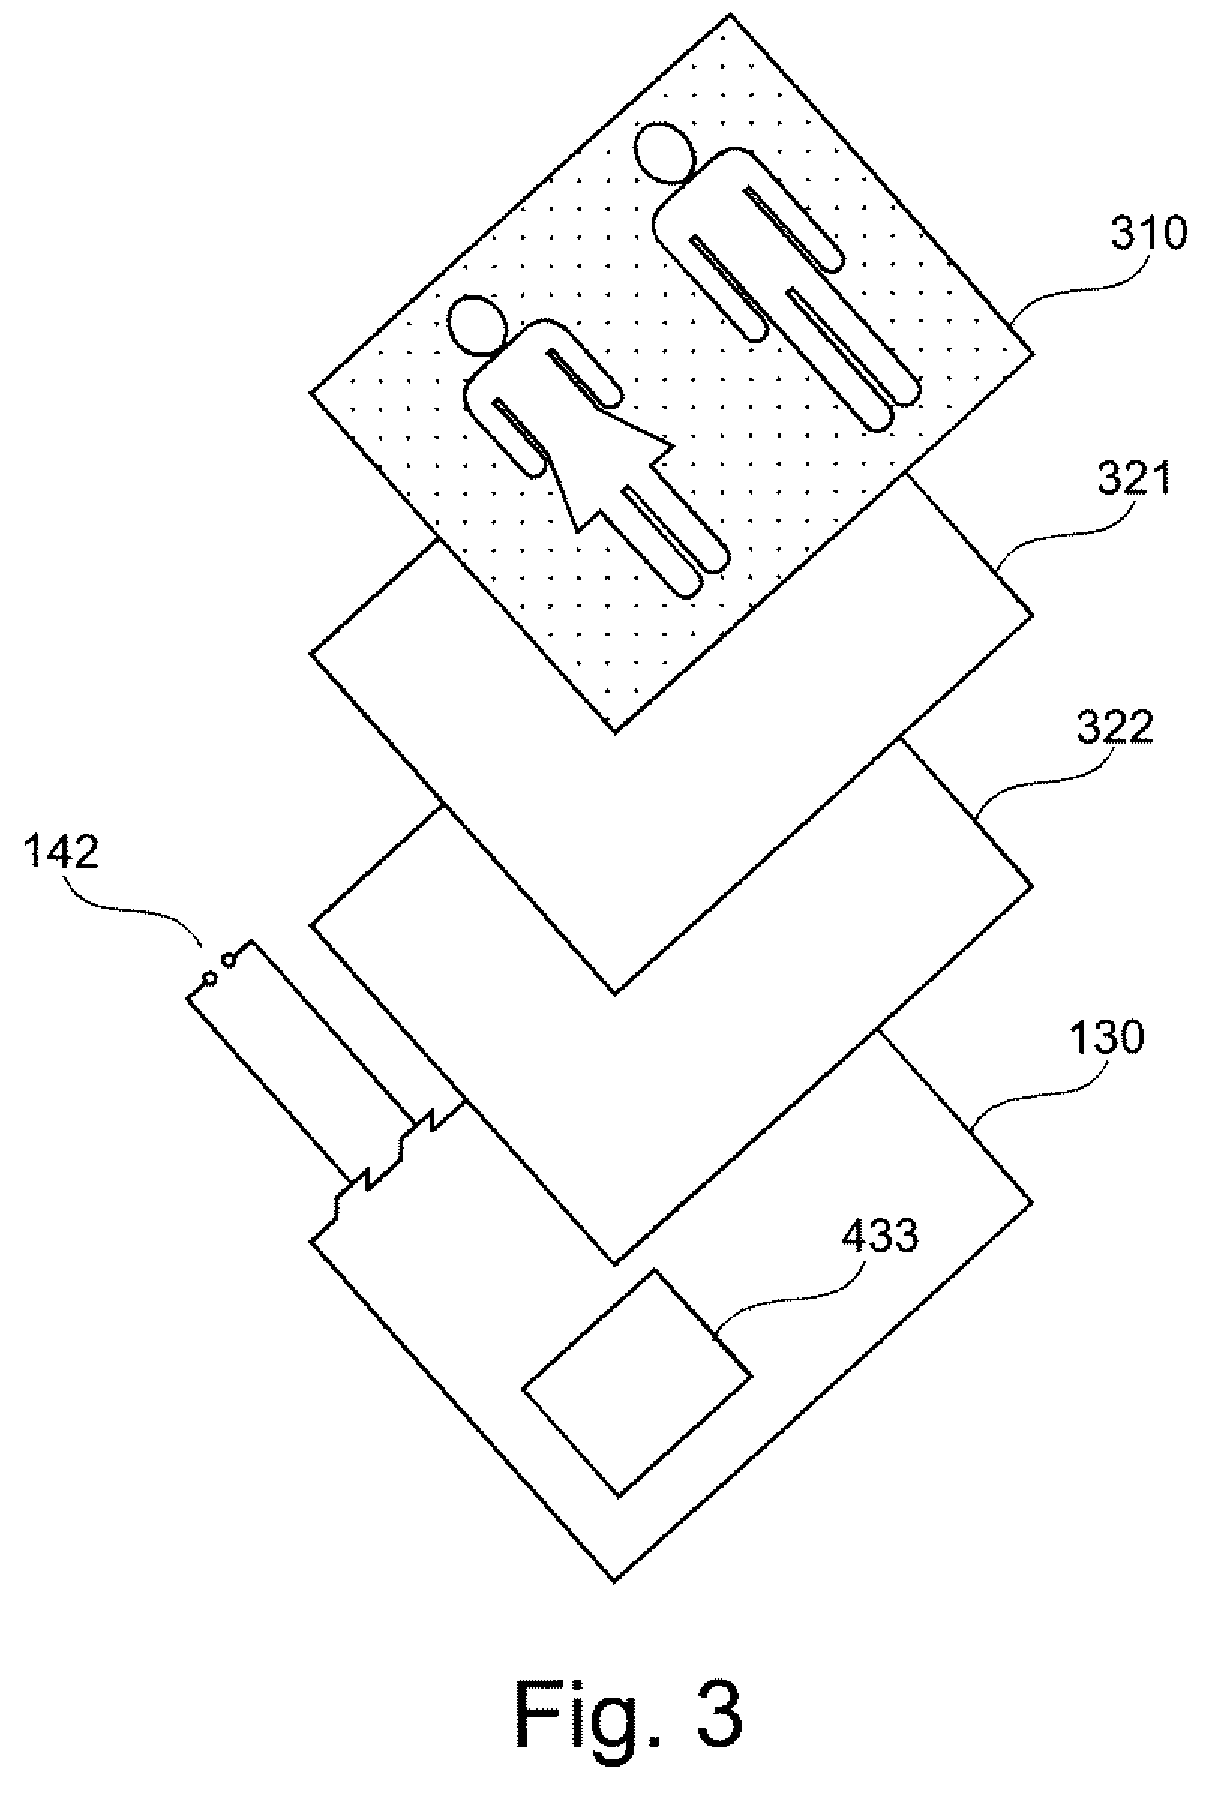 Flat illumination device for illumination and backlighting with integrated emergency power supply